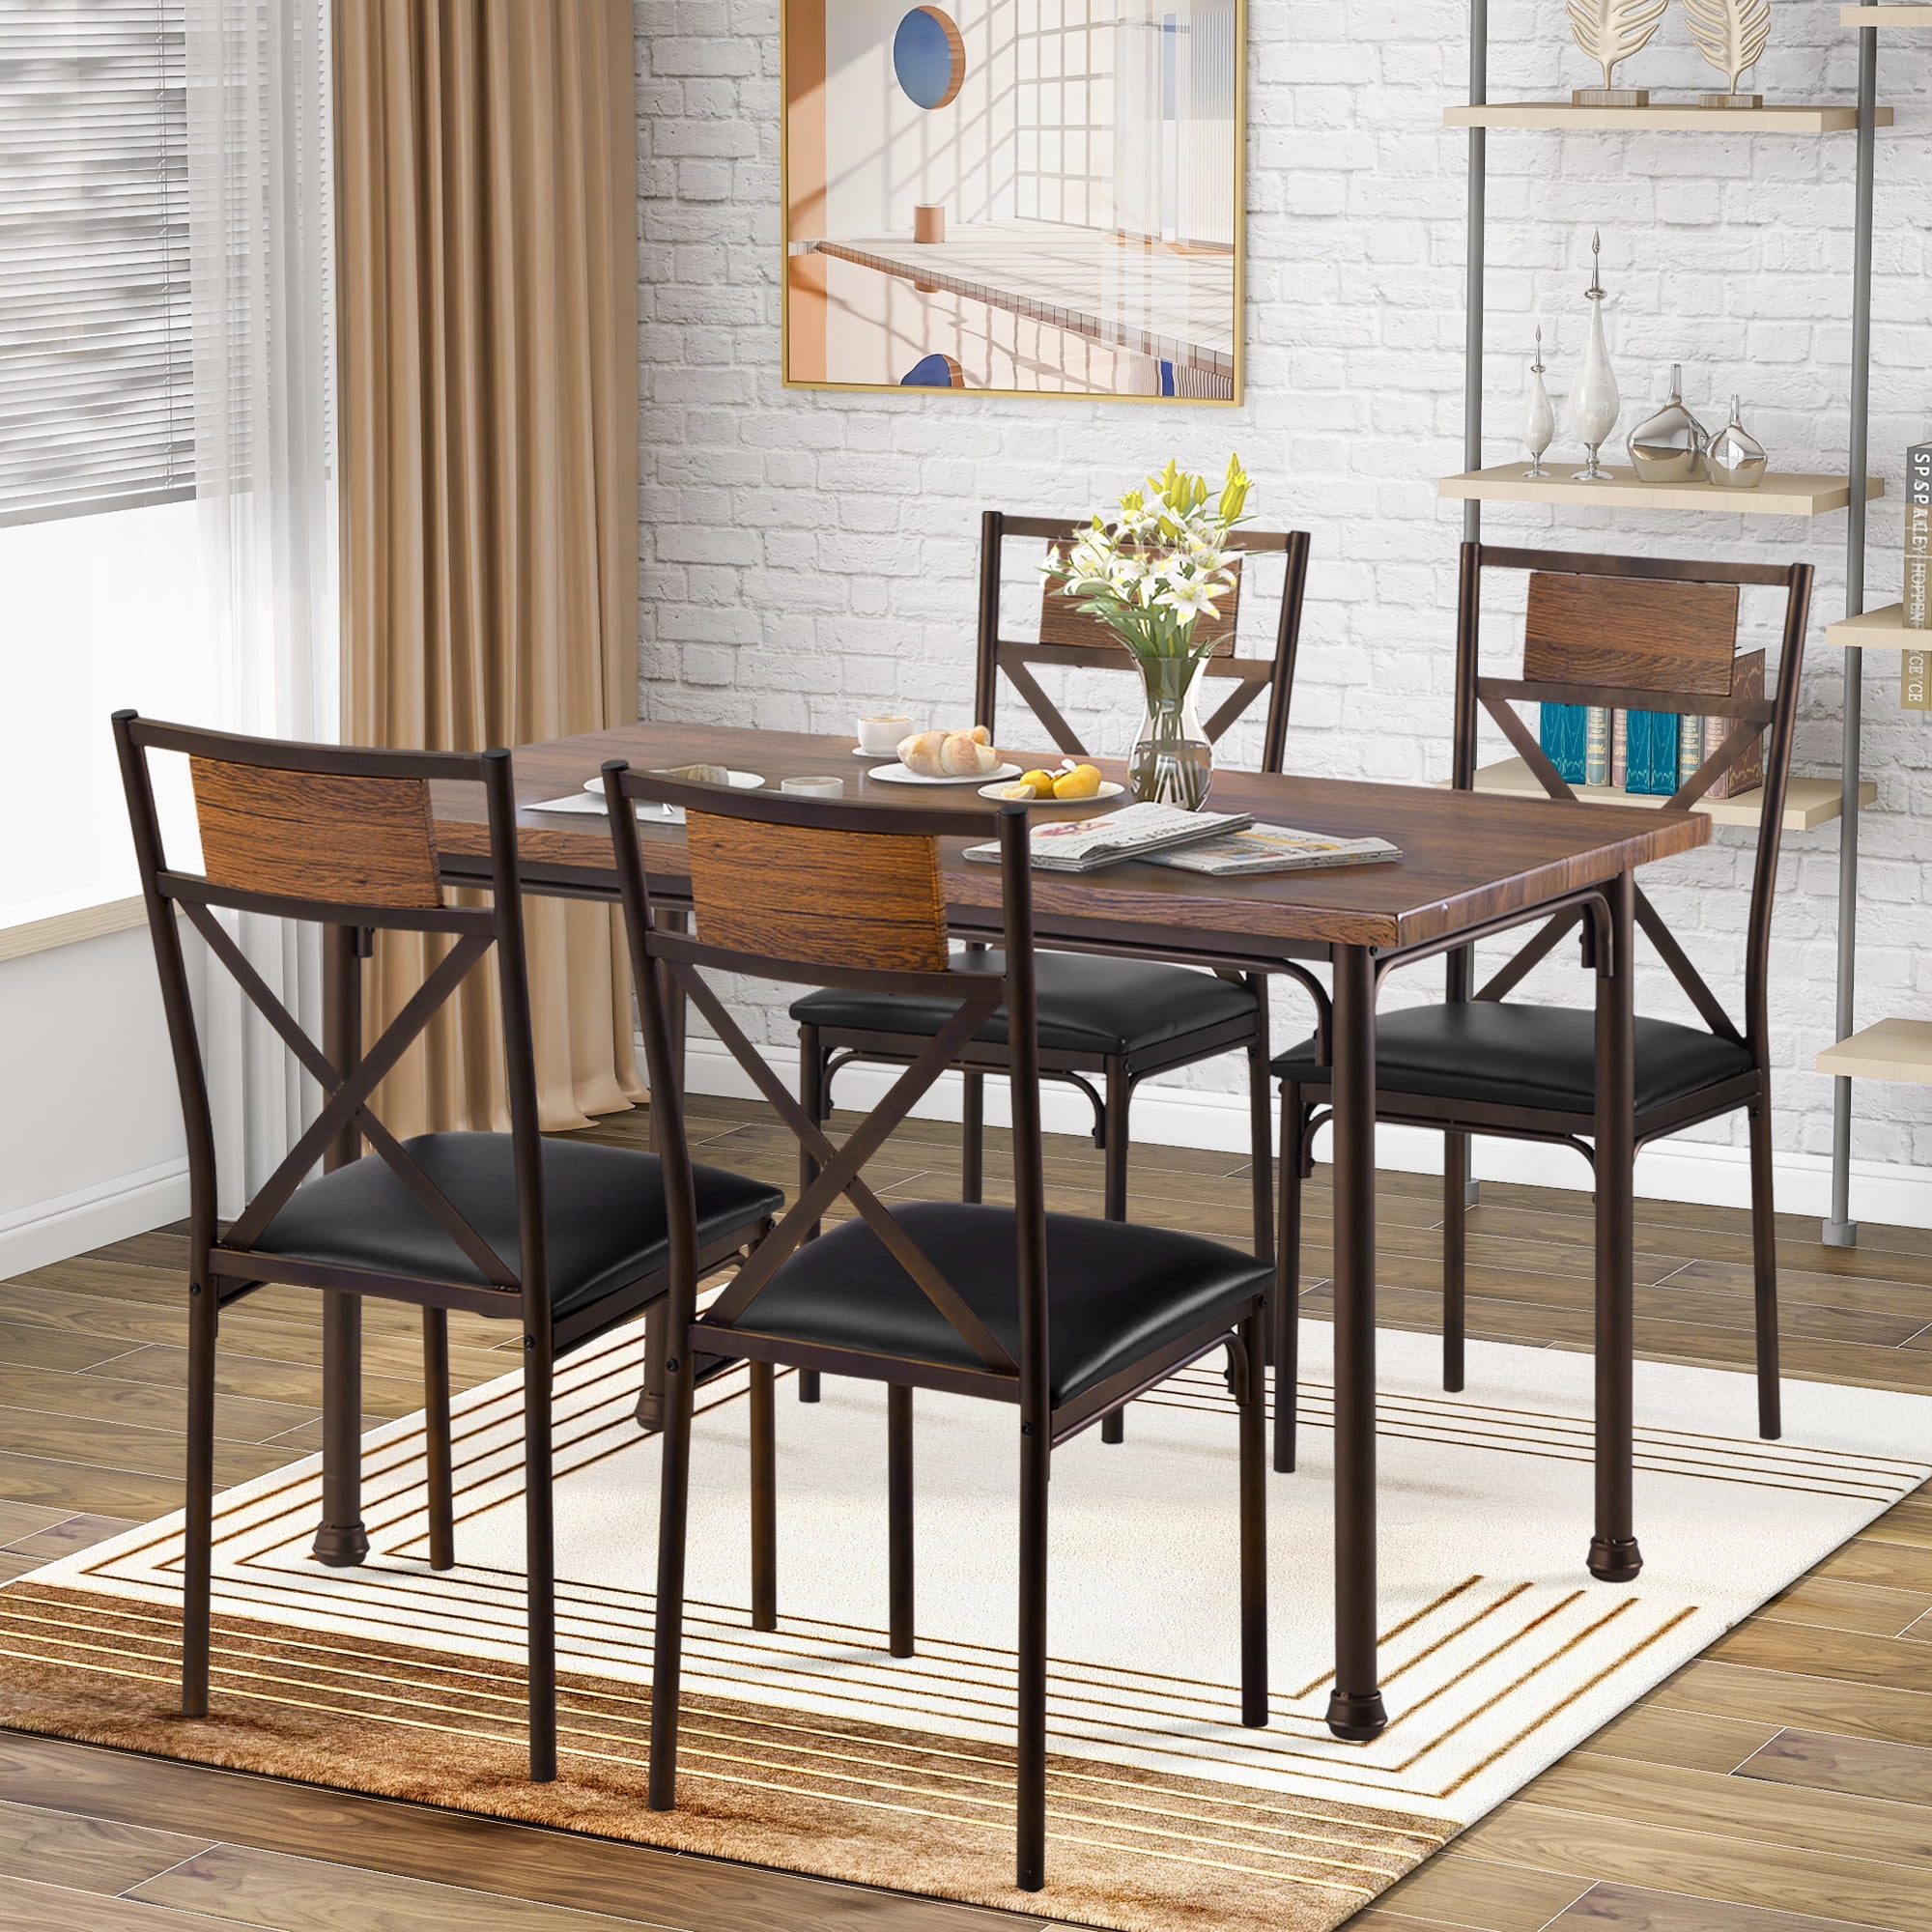 Wood Top Table Kitchen Furniture Set, Industrial Style Dining Room Chairs